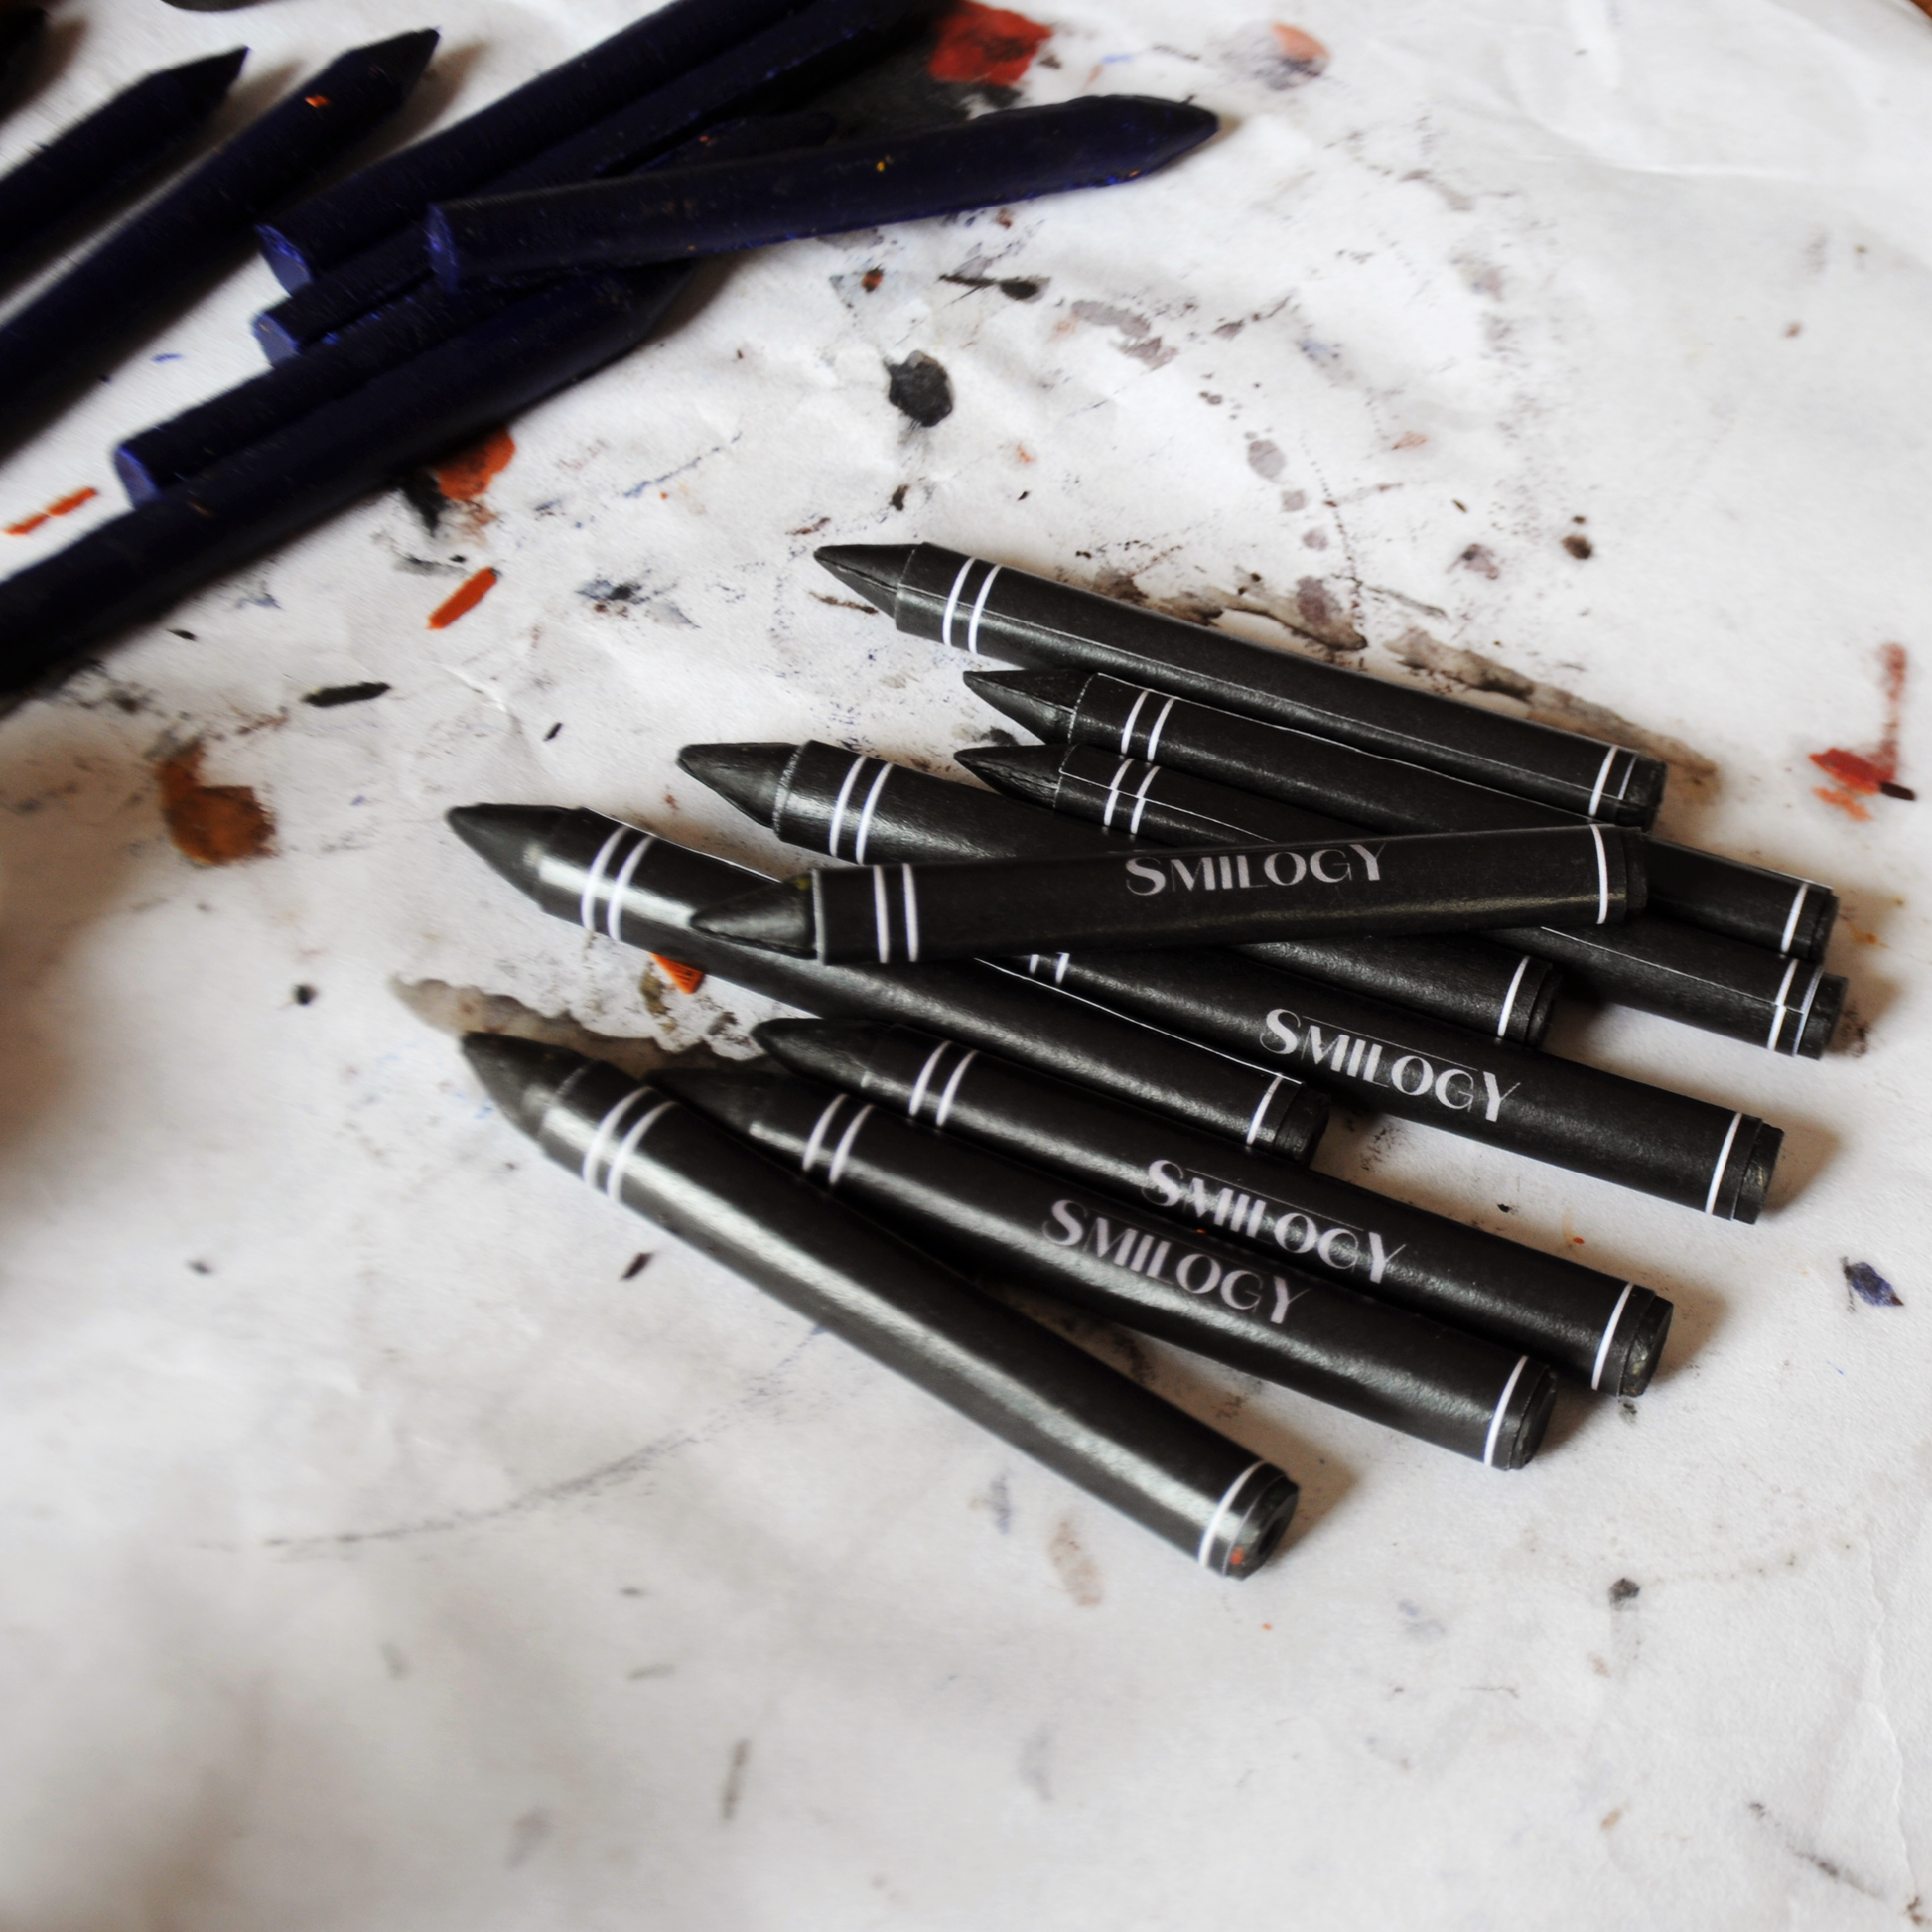 nontoxic and all natural black beeswax crayons from the drawing crayon set wrapped and ready on a white surface